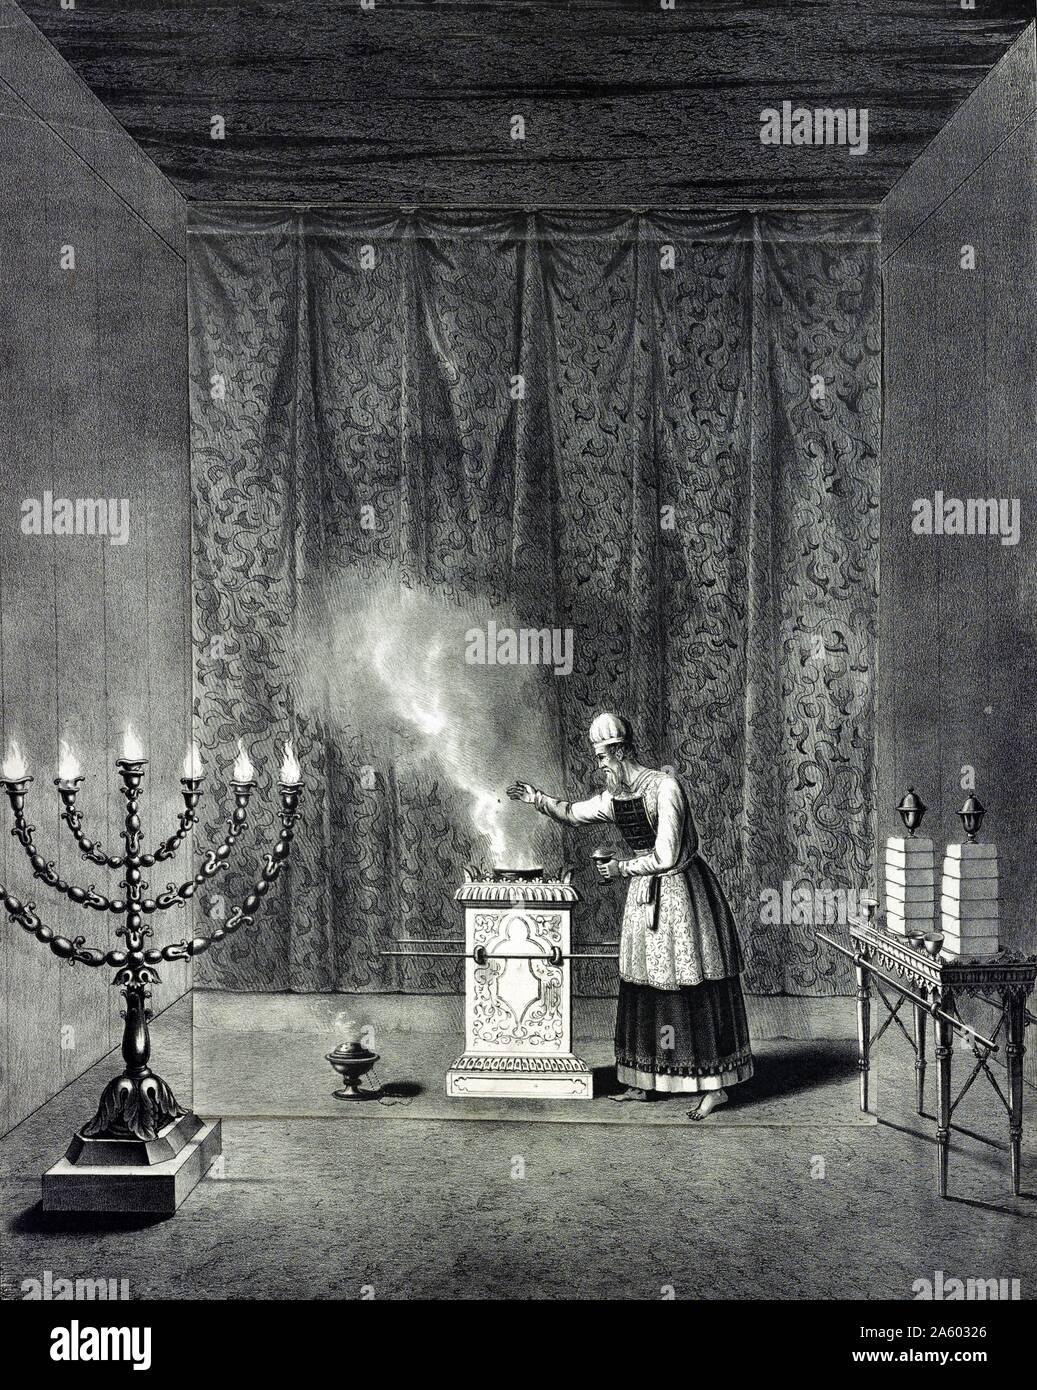 The holy place by John Henry Camp (1822-1881). Lithograph with overlay, print shows, at centre, a priest putting incense into a center on 'The Altar of Incense', a large portable stand with carrying rods on two sides;a small censer sits on the floor nearby. On the left is 'The Golden Candlestick' and on the right is 'The Table of Shewbread'. Stock Photo